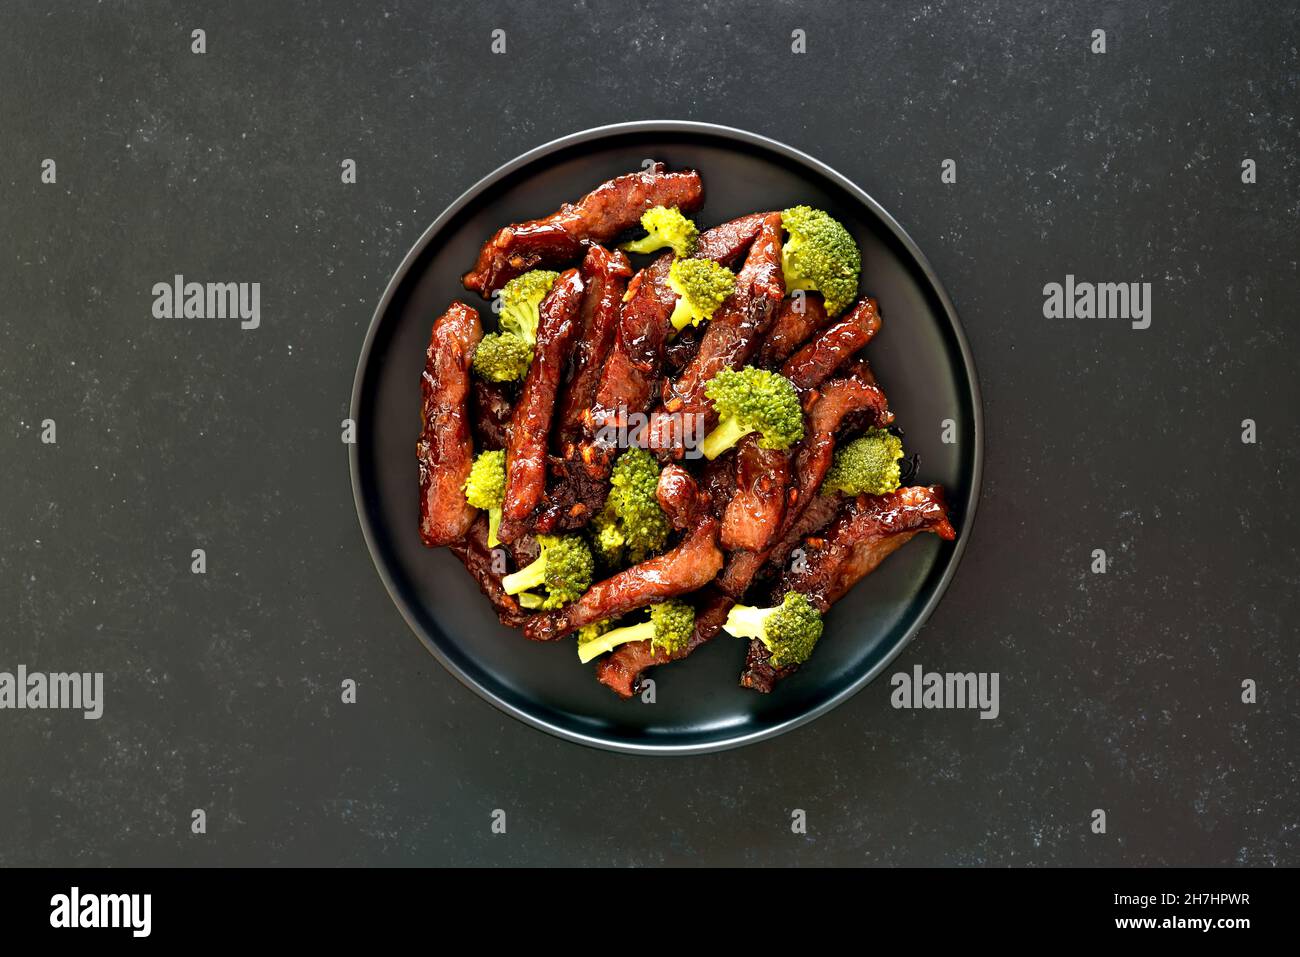 Beef and broccoli stir fry on dark background. Top view, flat lay Stock Photo